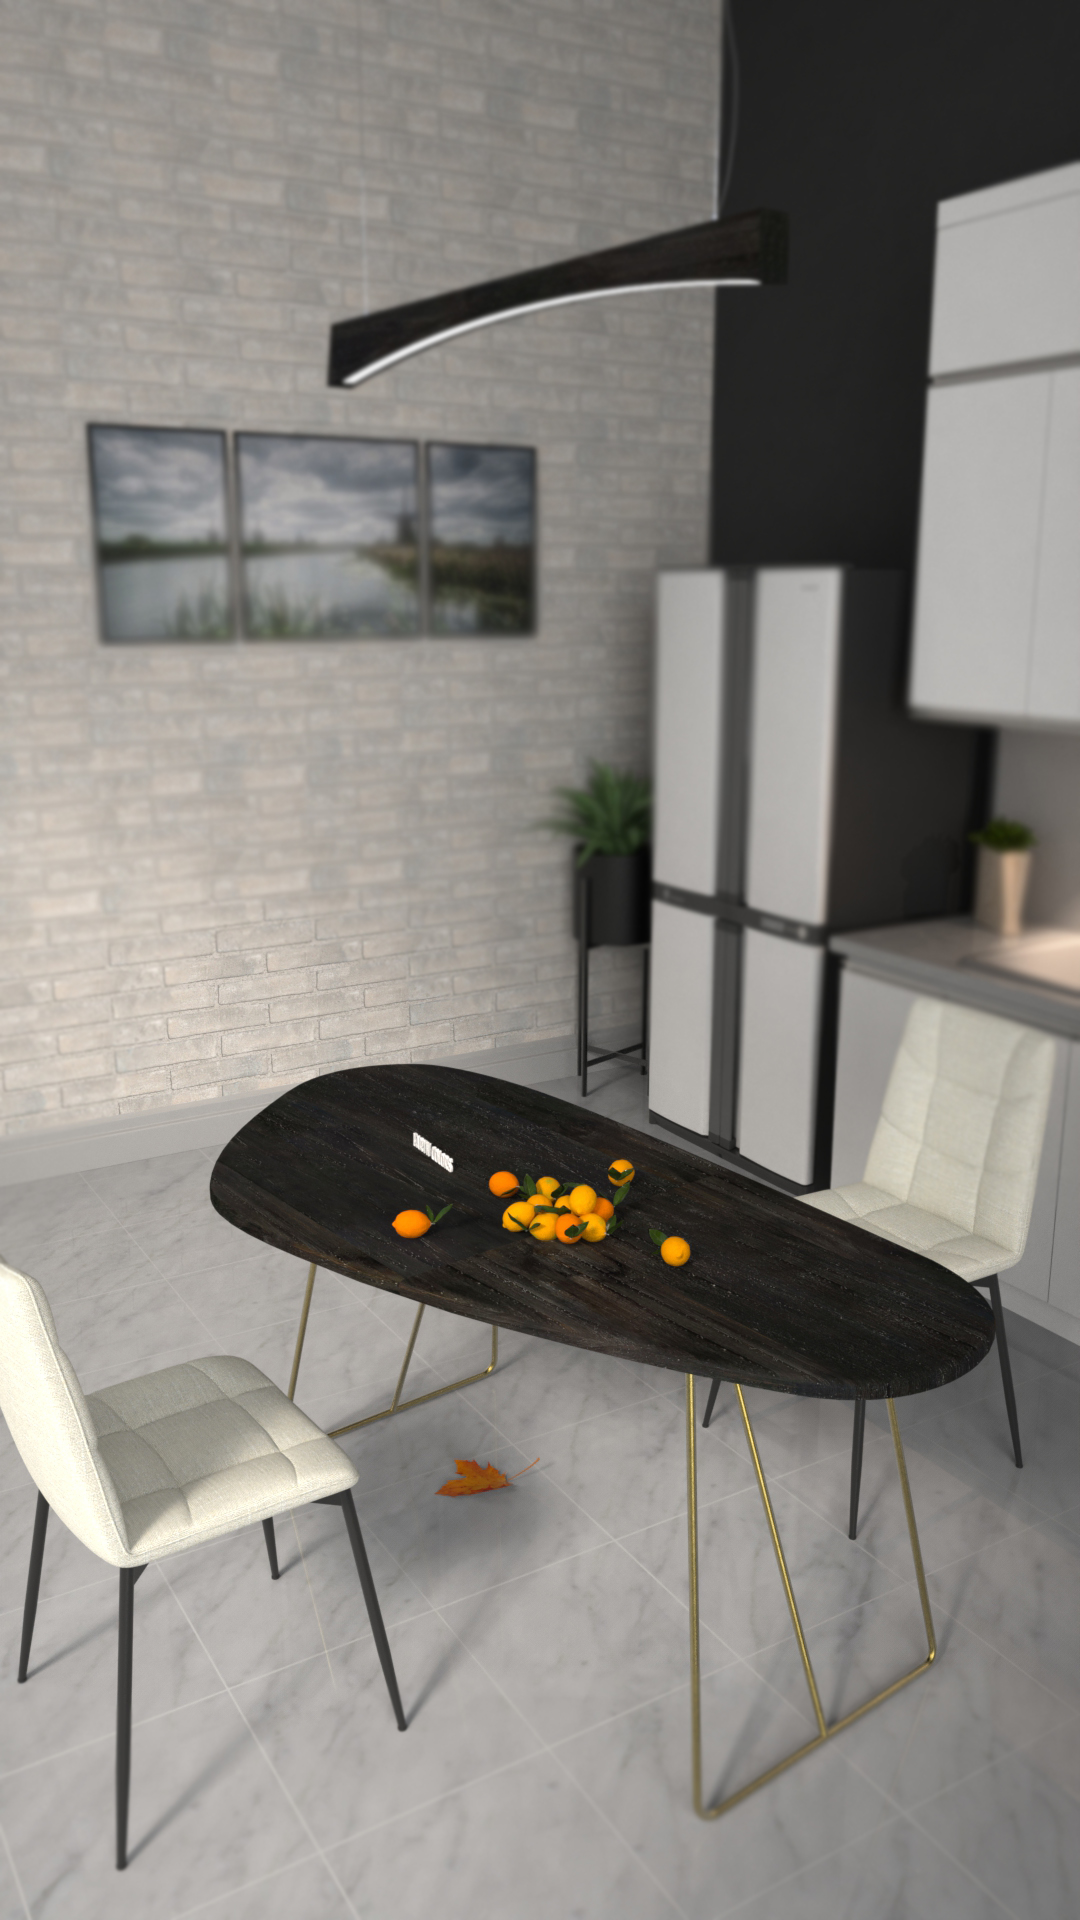 Small wood table for kitchen